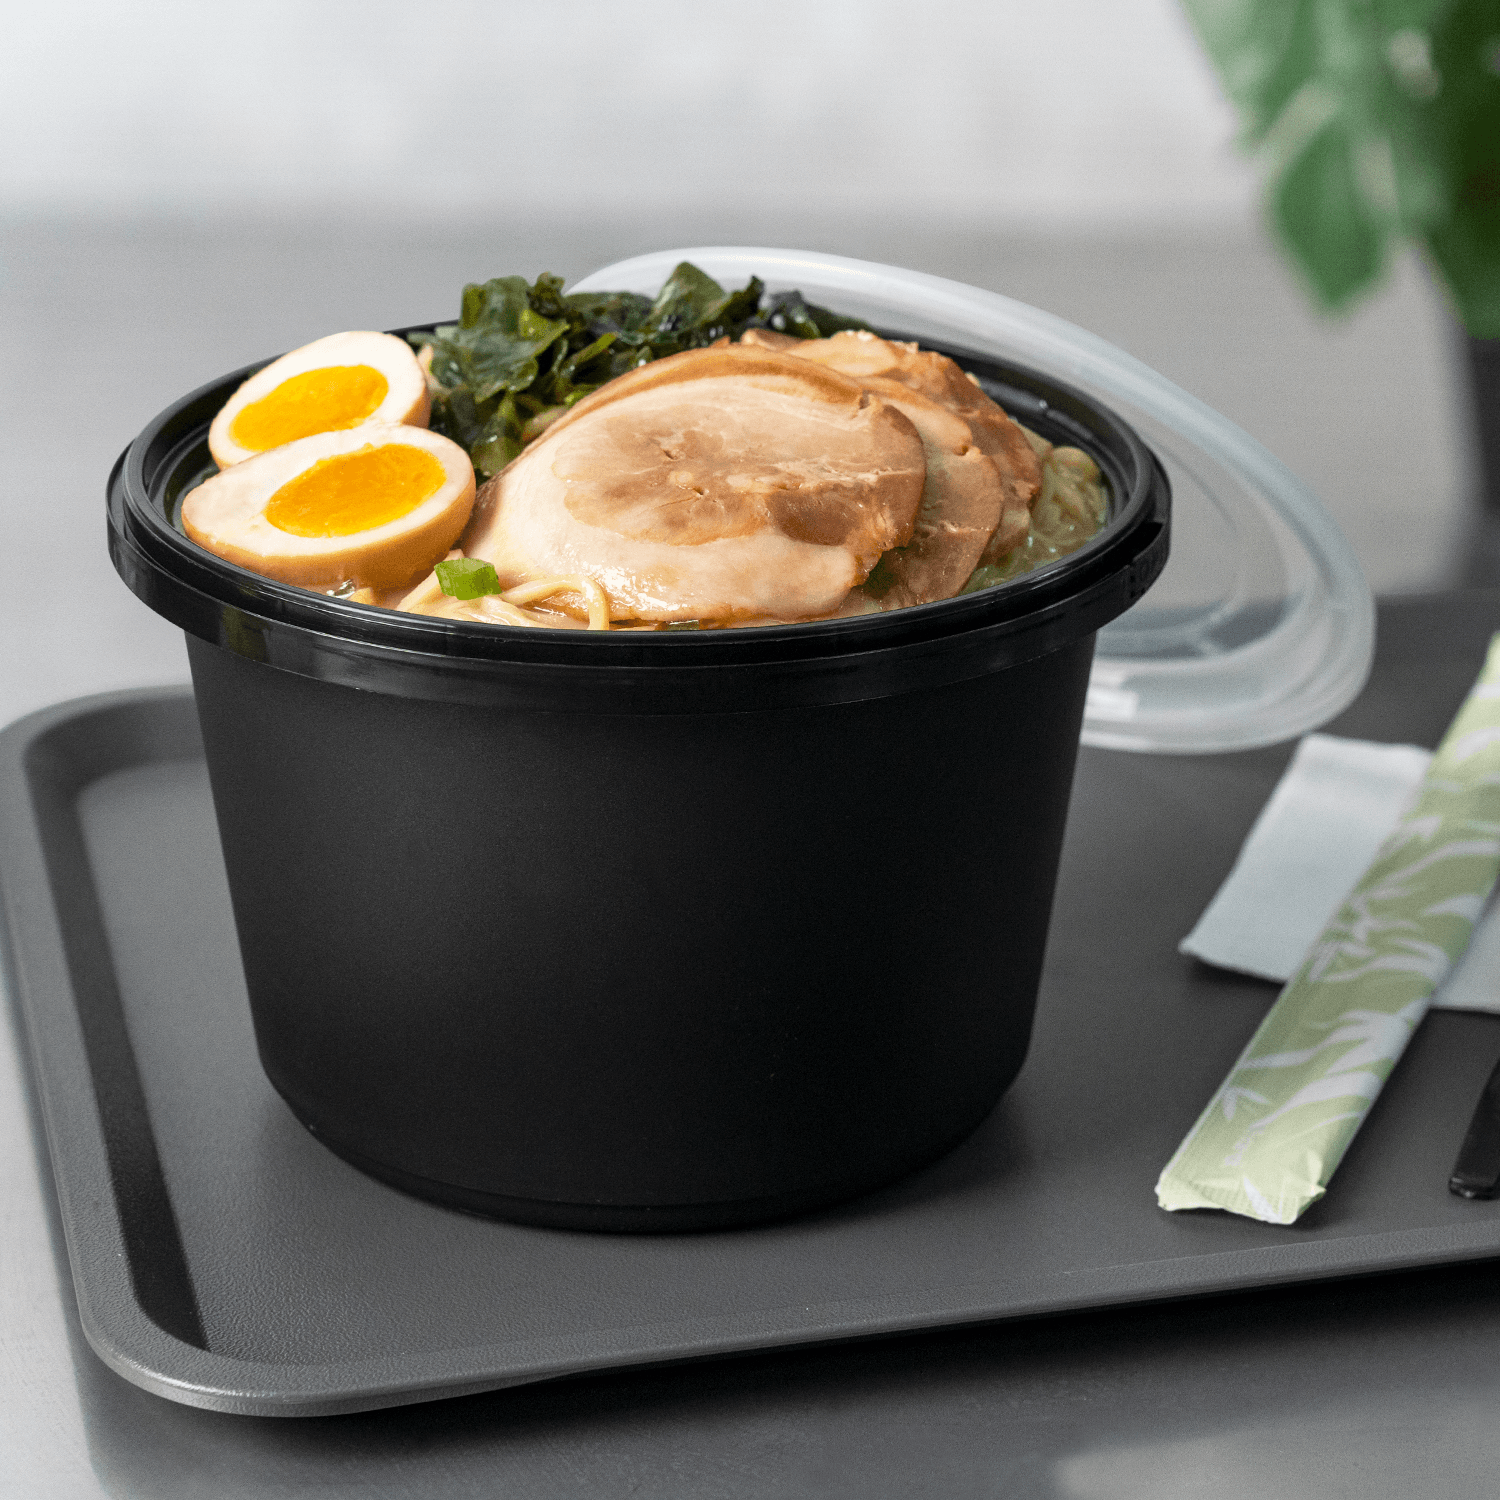 Karat 60oz PP Tamper Resistant Injection Molded Microwaveable Black Food Container w/Clear lid - 150 pcs